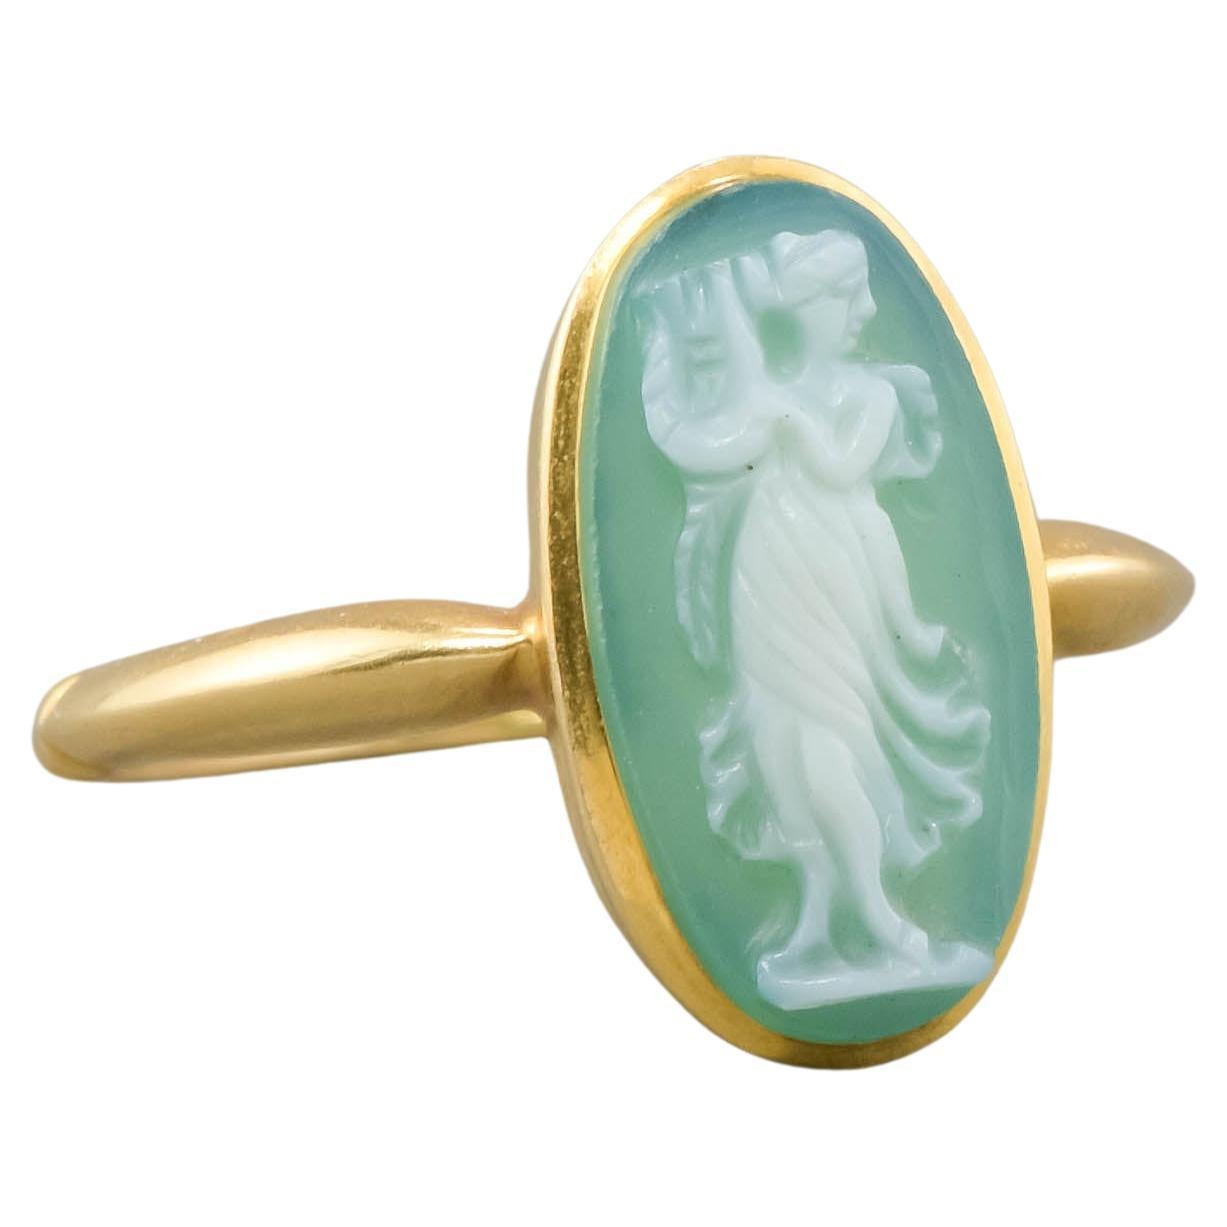 Carved Green Chalcedony Cameo Ring in 18K Gold, Hallmarked Chester 1909